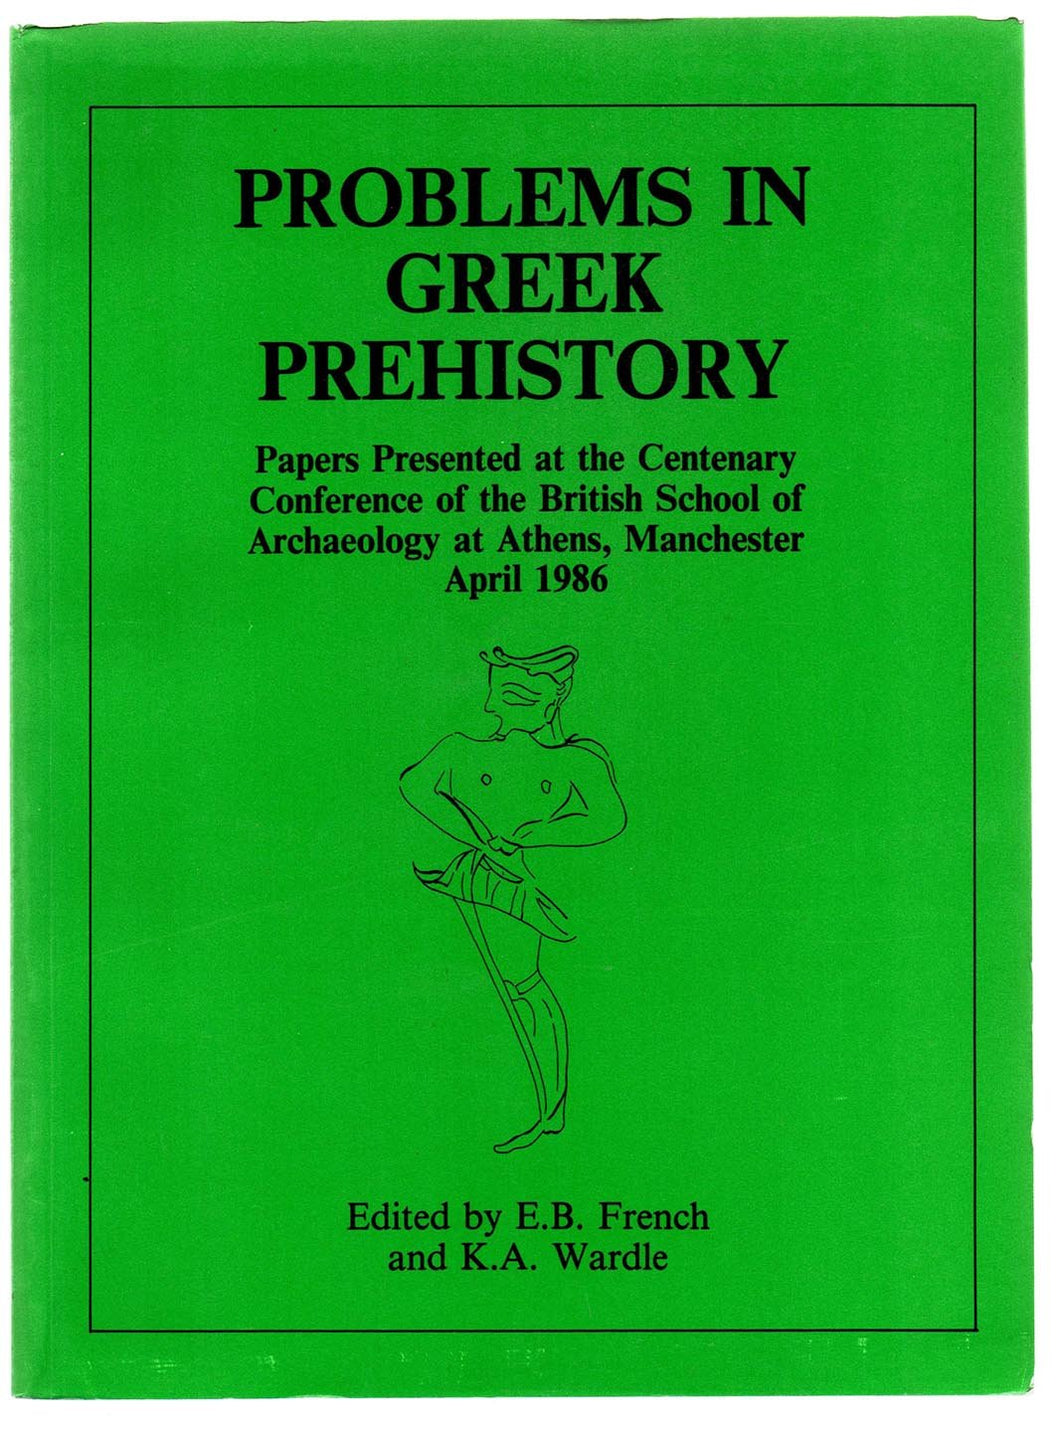 Problems in Greek Prehistory: Papers Presented at the Centenary Conference of the British School of Archaeology at Athens, Manchester April 1986